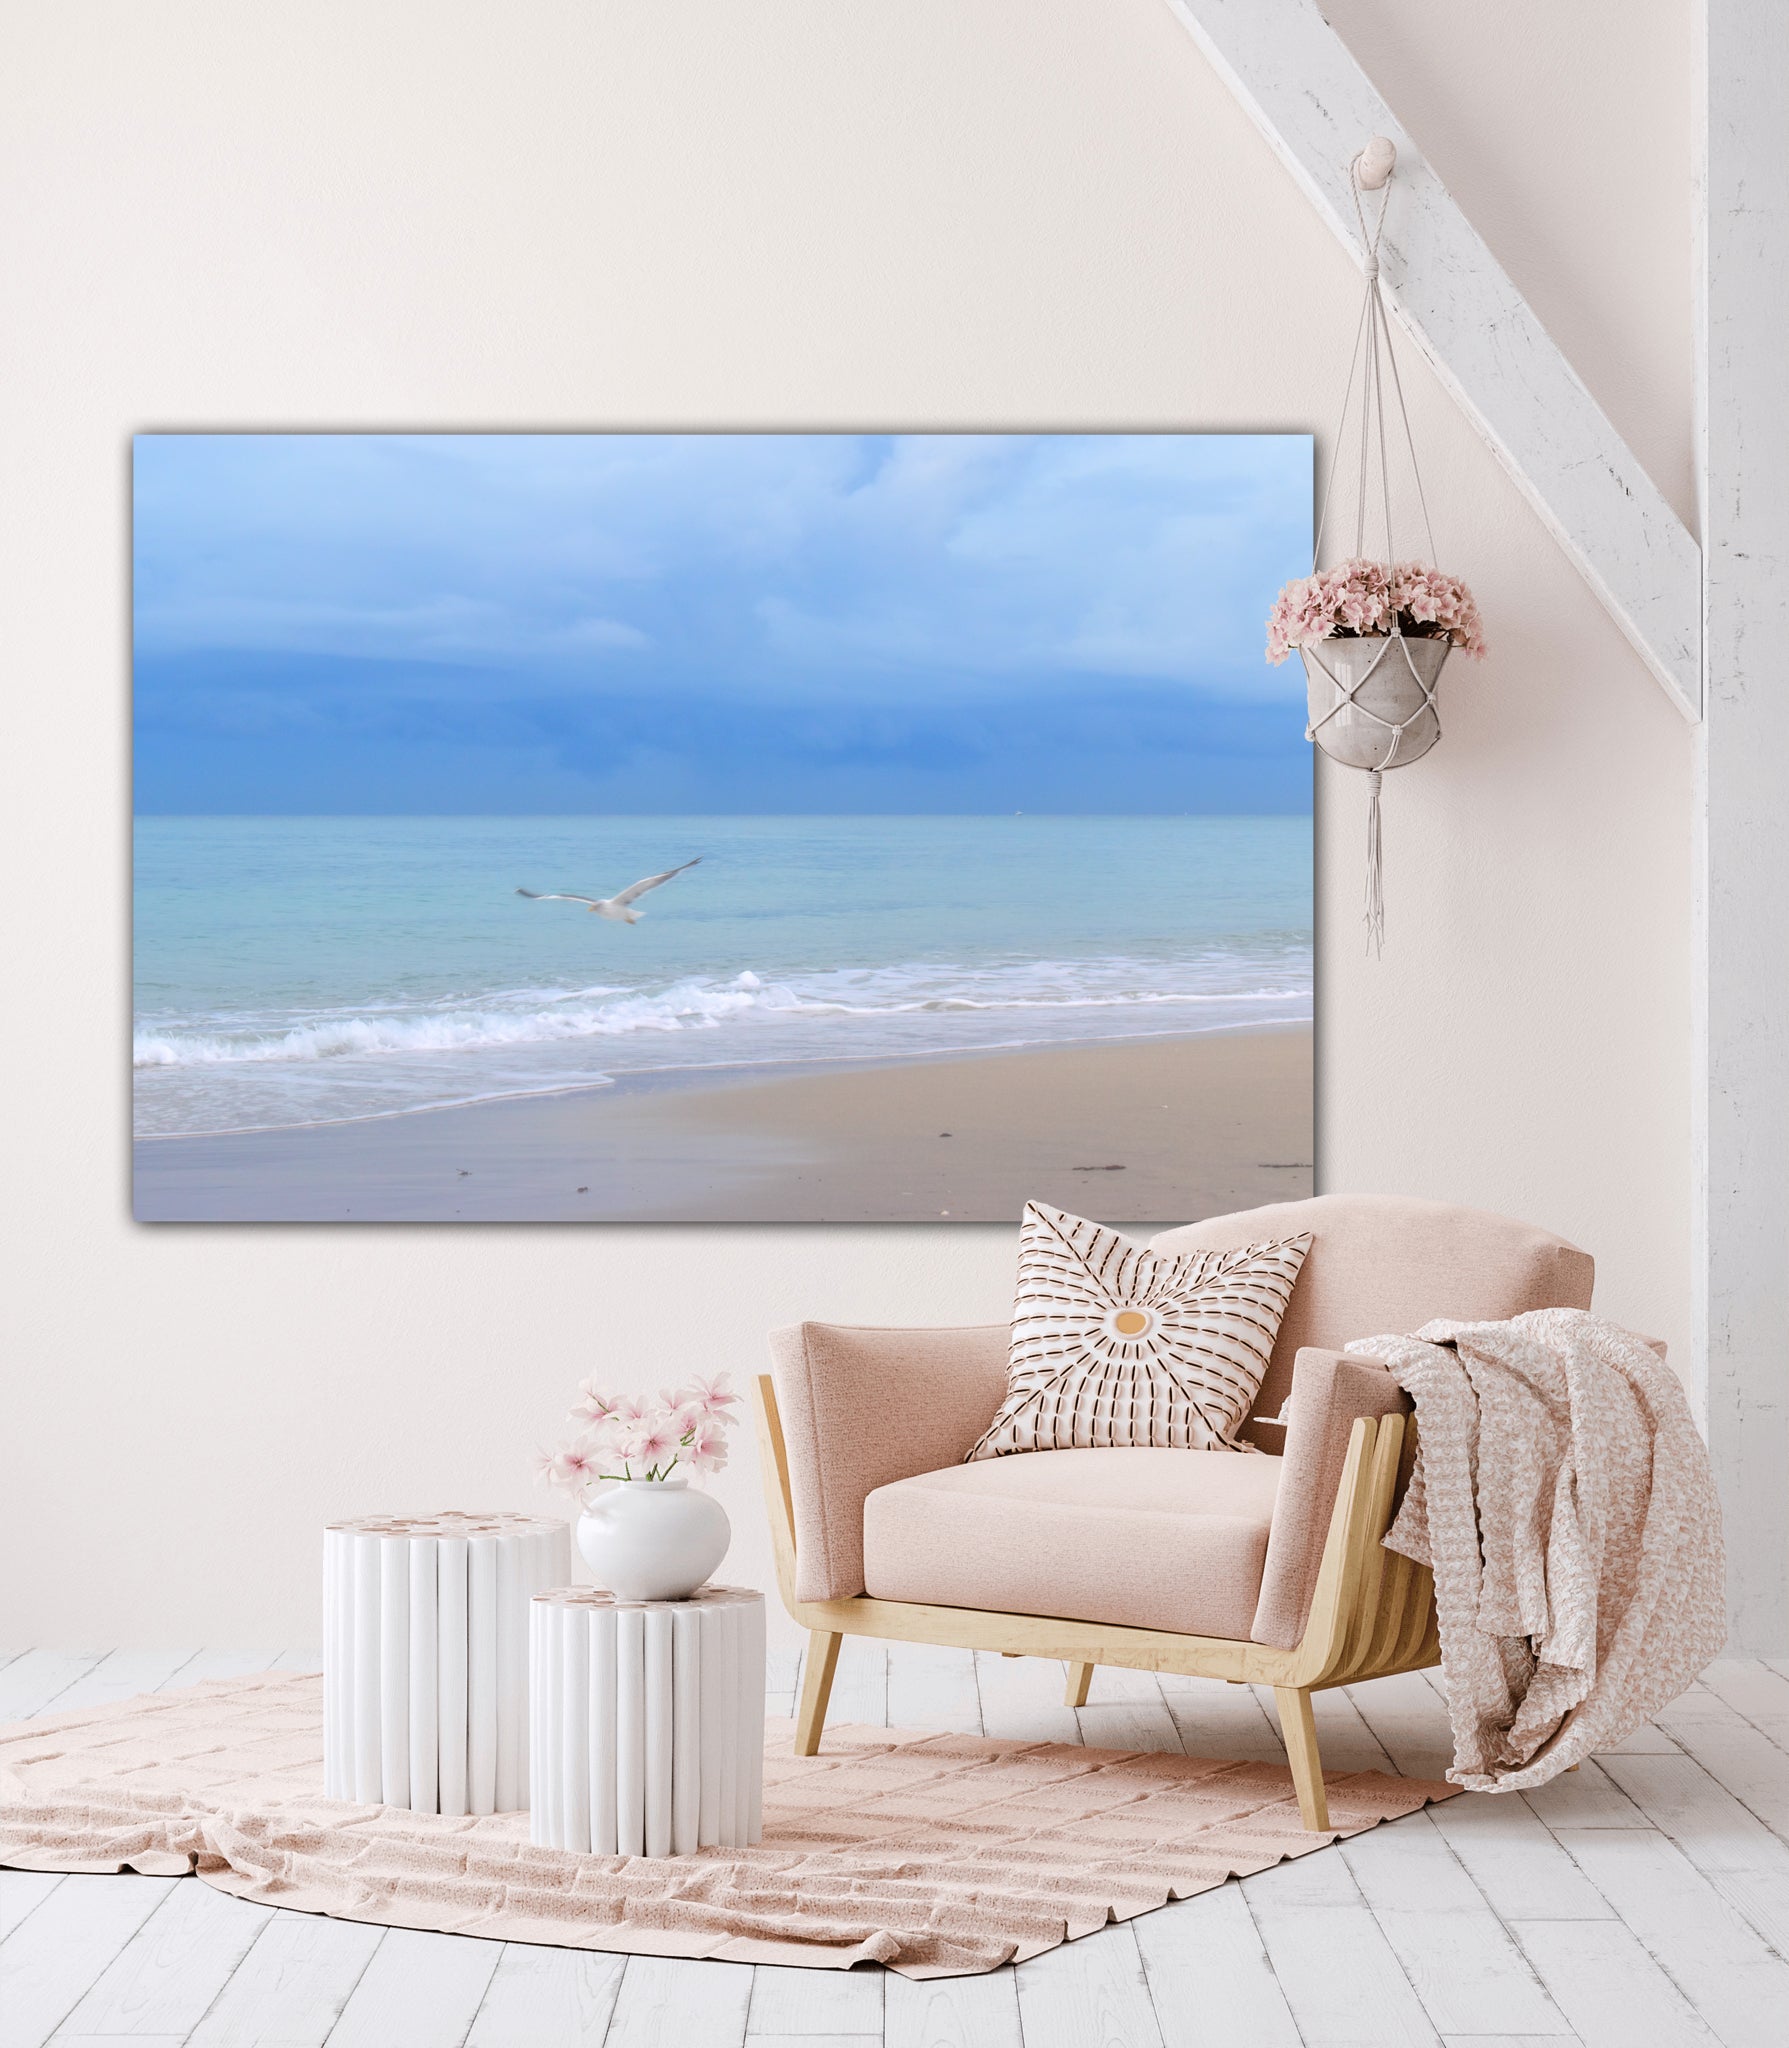 peacefully coasting over the beach acrylic print home decor by jacqueline mb designs 